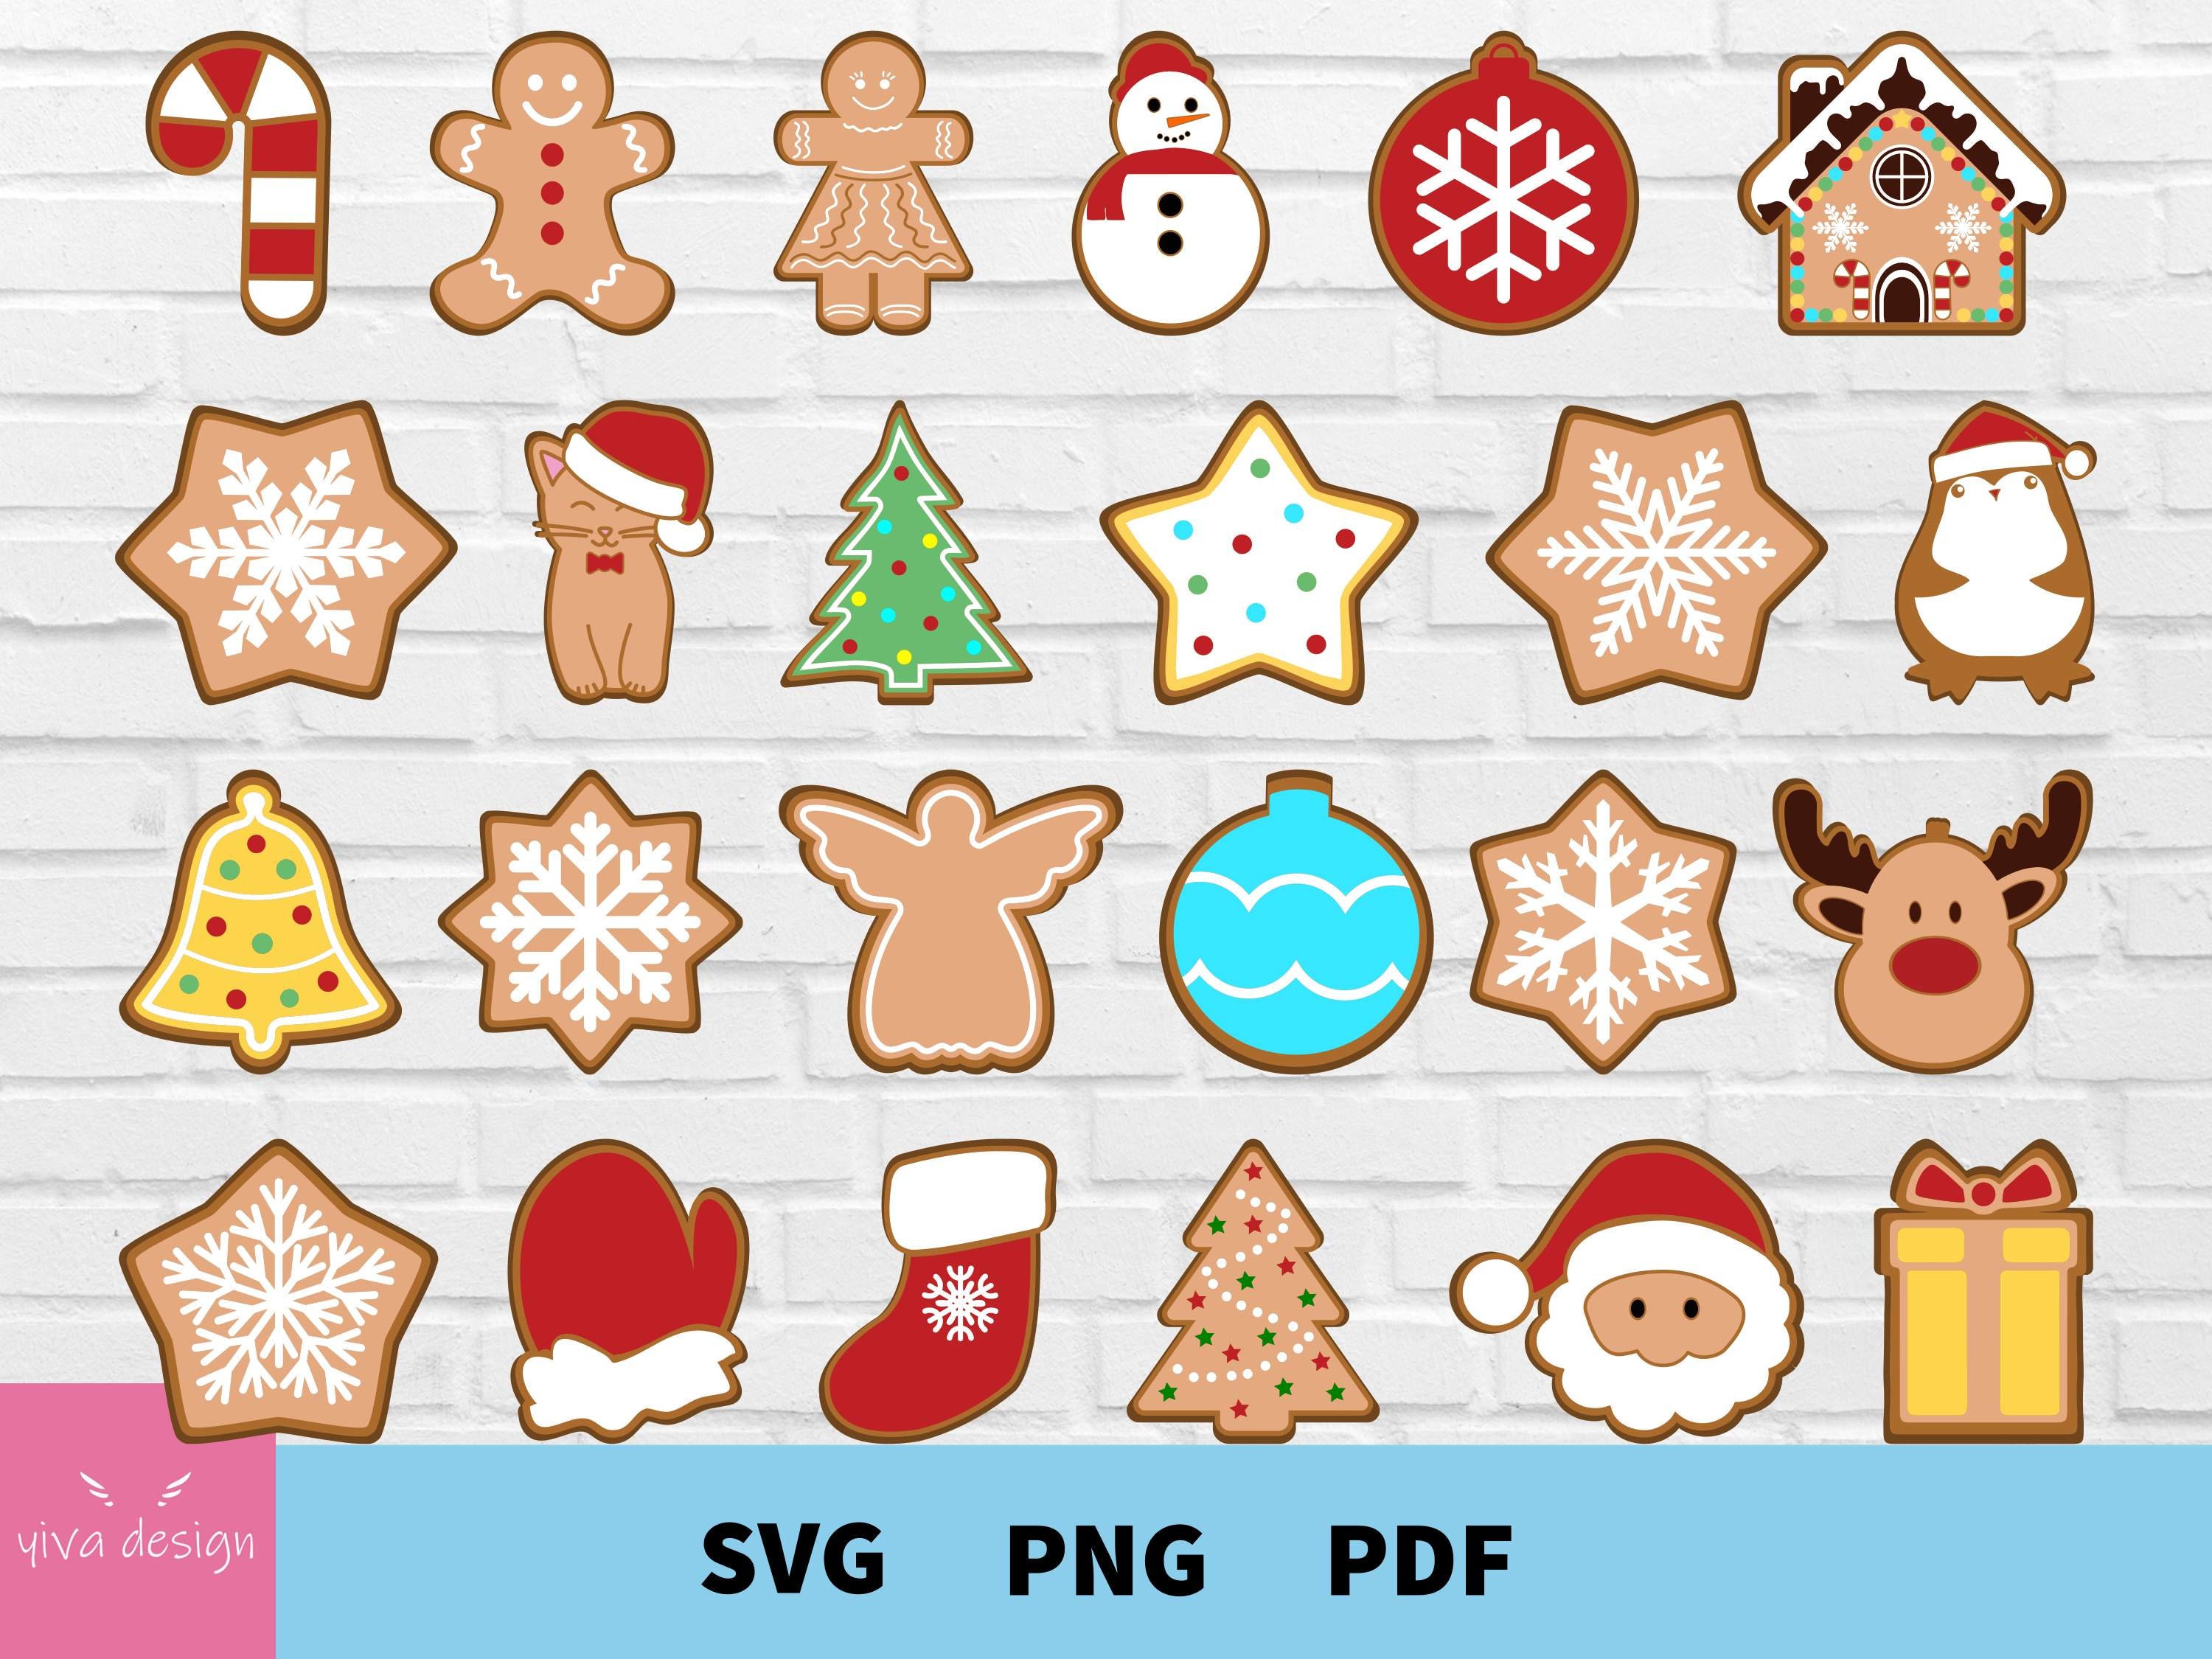 .com: Cookie Cutter Kingdom 8 Piece Cookie Stencils For Cookie  Decorating - Christmas Cookie Stencils For Royal Icing - 8 Piece Plastic  Cookie Stencil Set 5.5 x 5.5 Inch Squares: Home & Kitchen